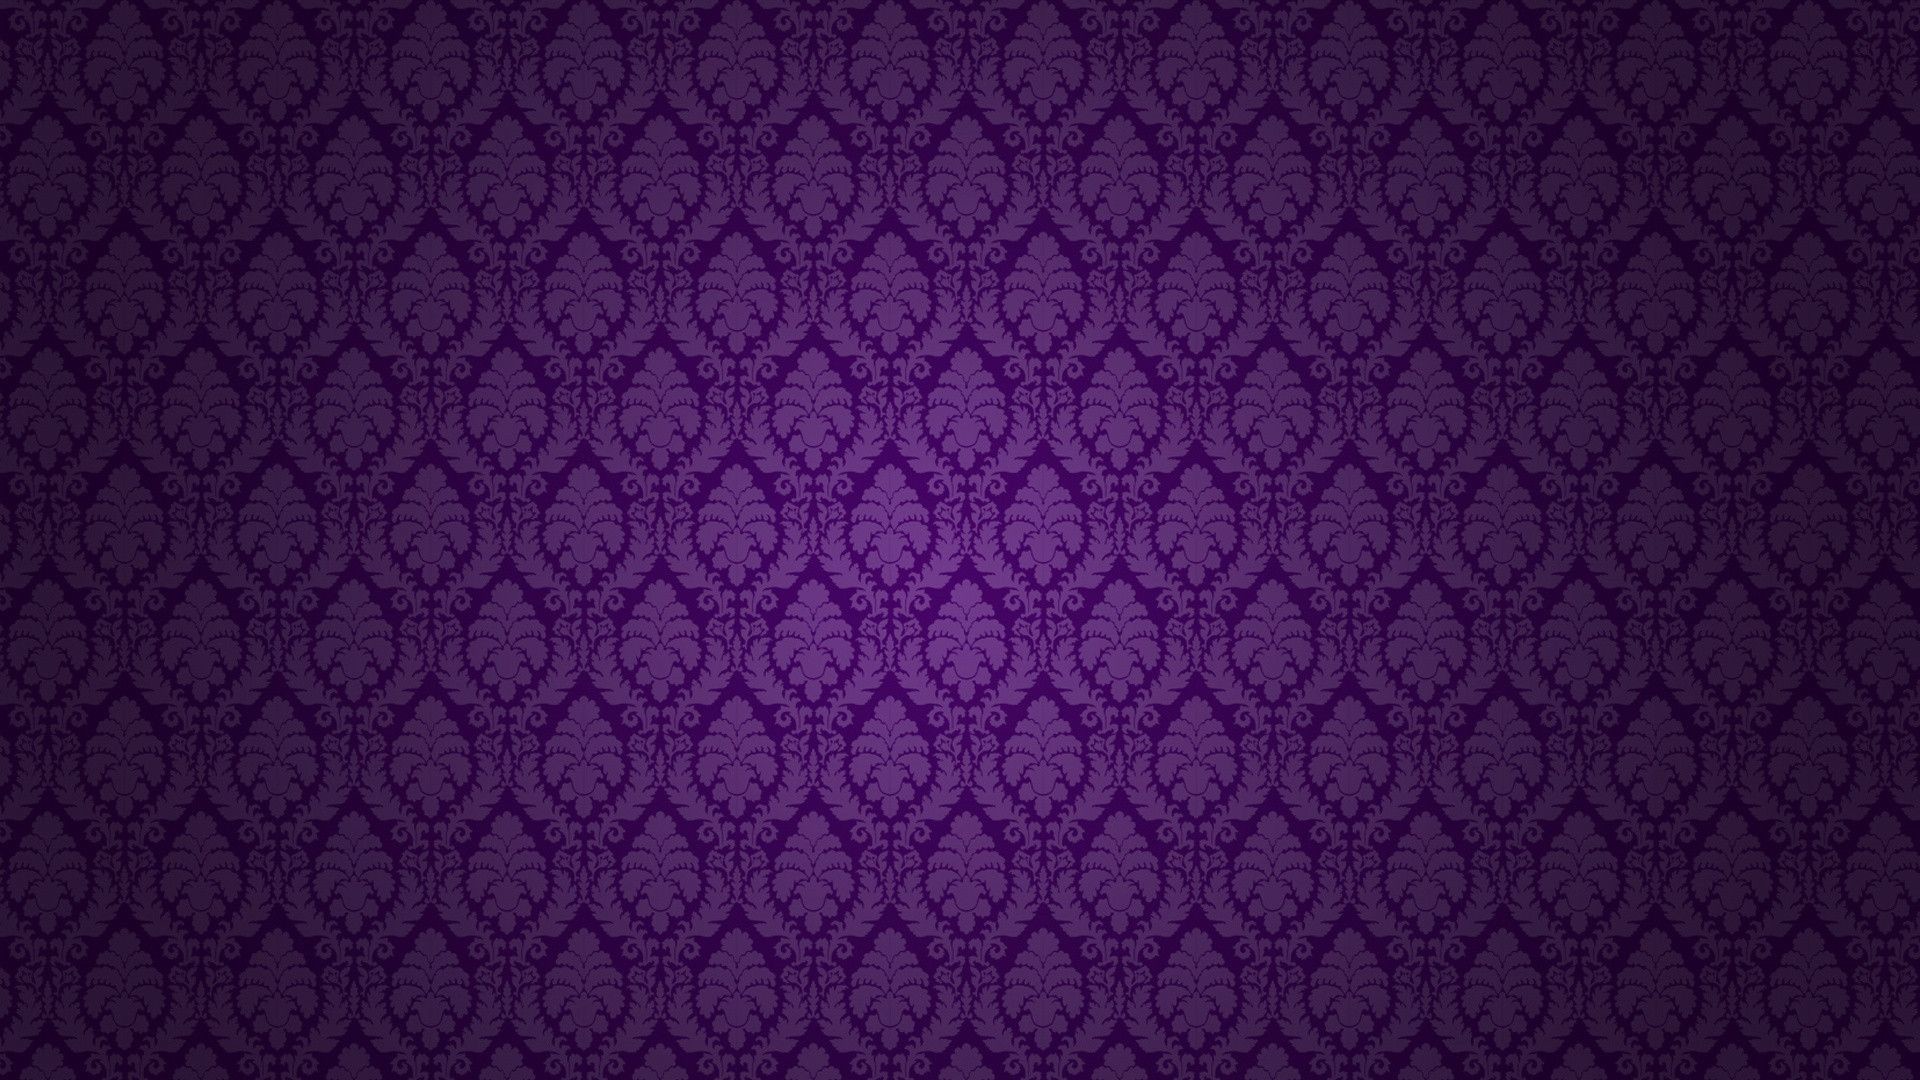 1920x1080 ... 43 HD Purple Wallpaperackground Images To Download For Free ...